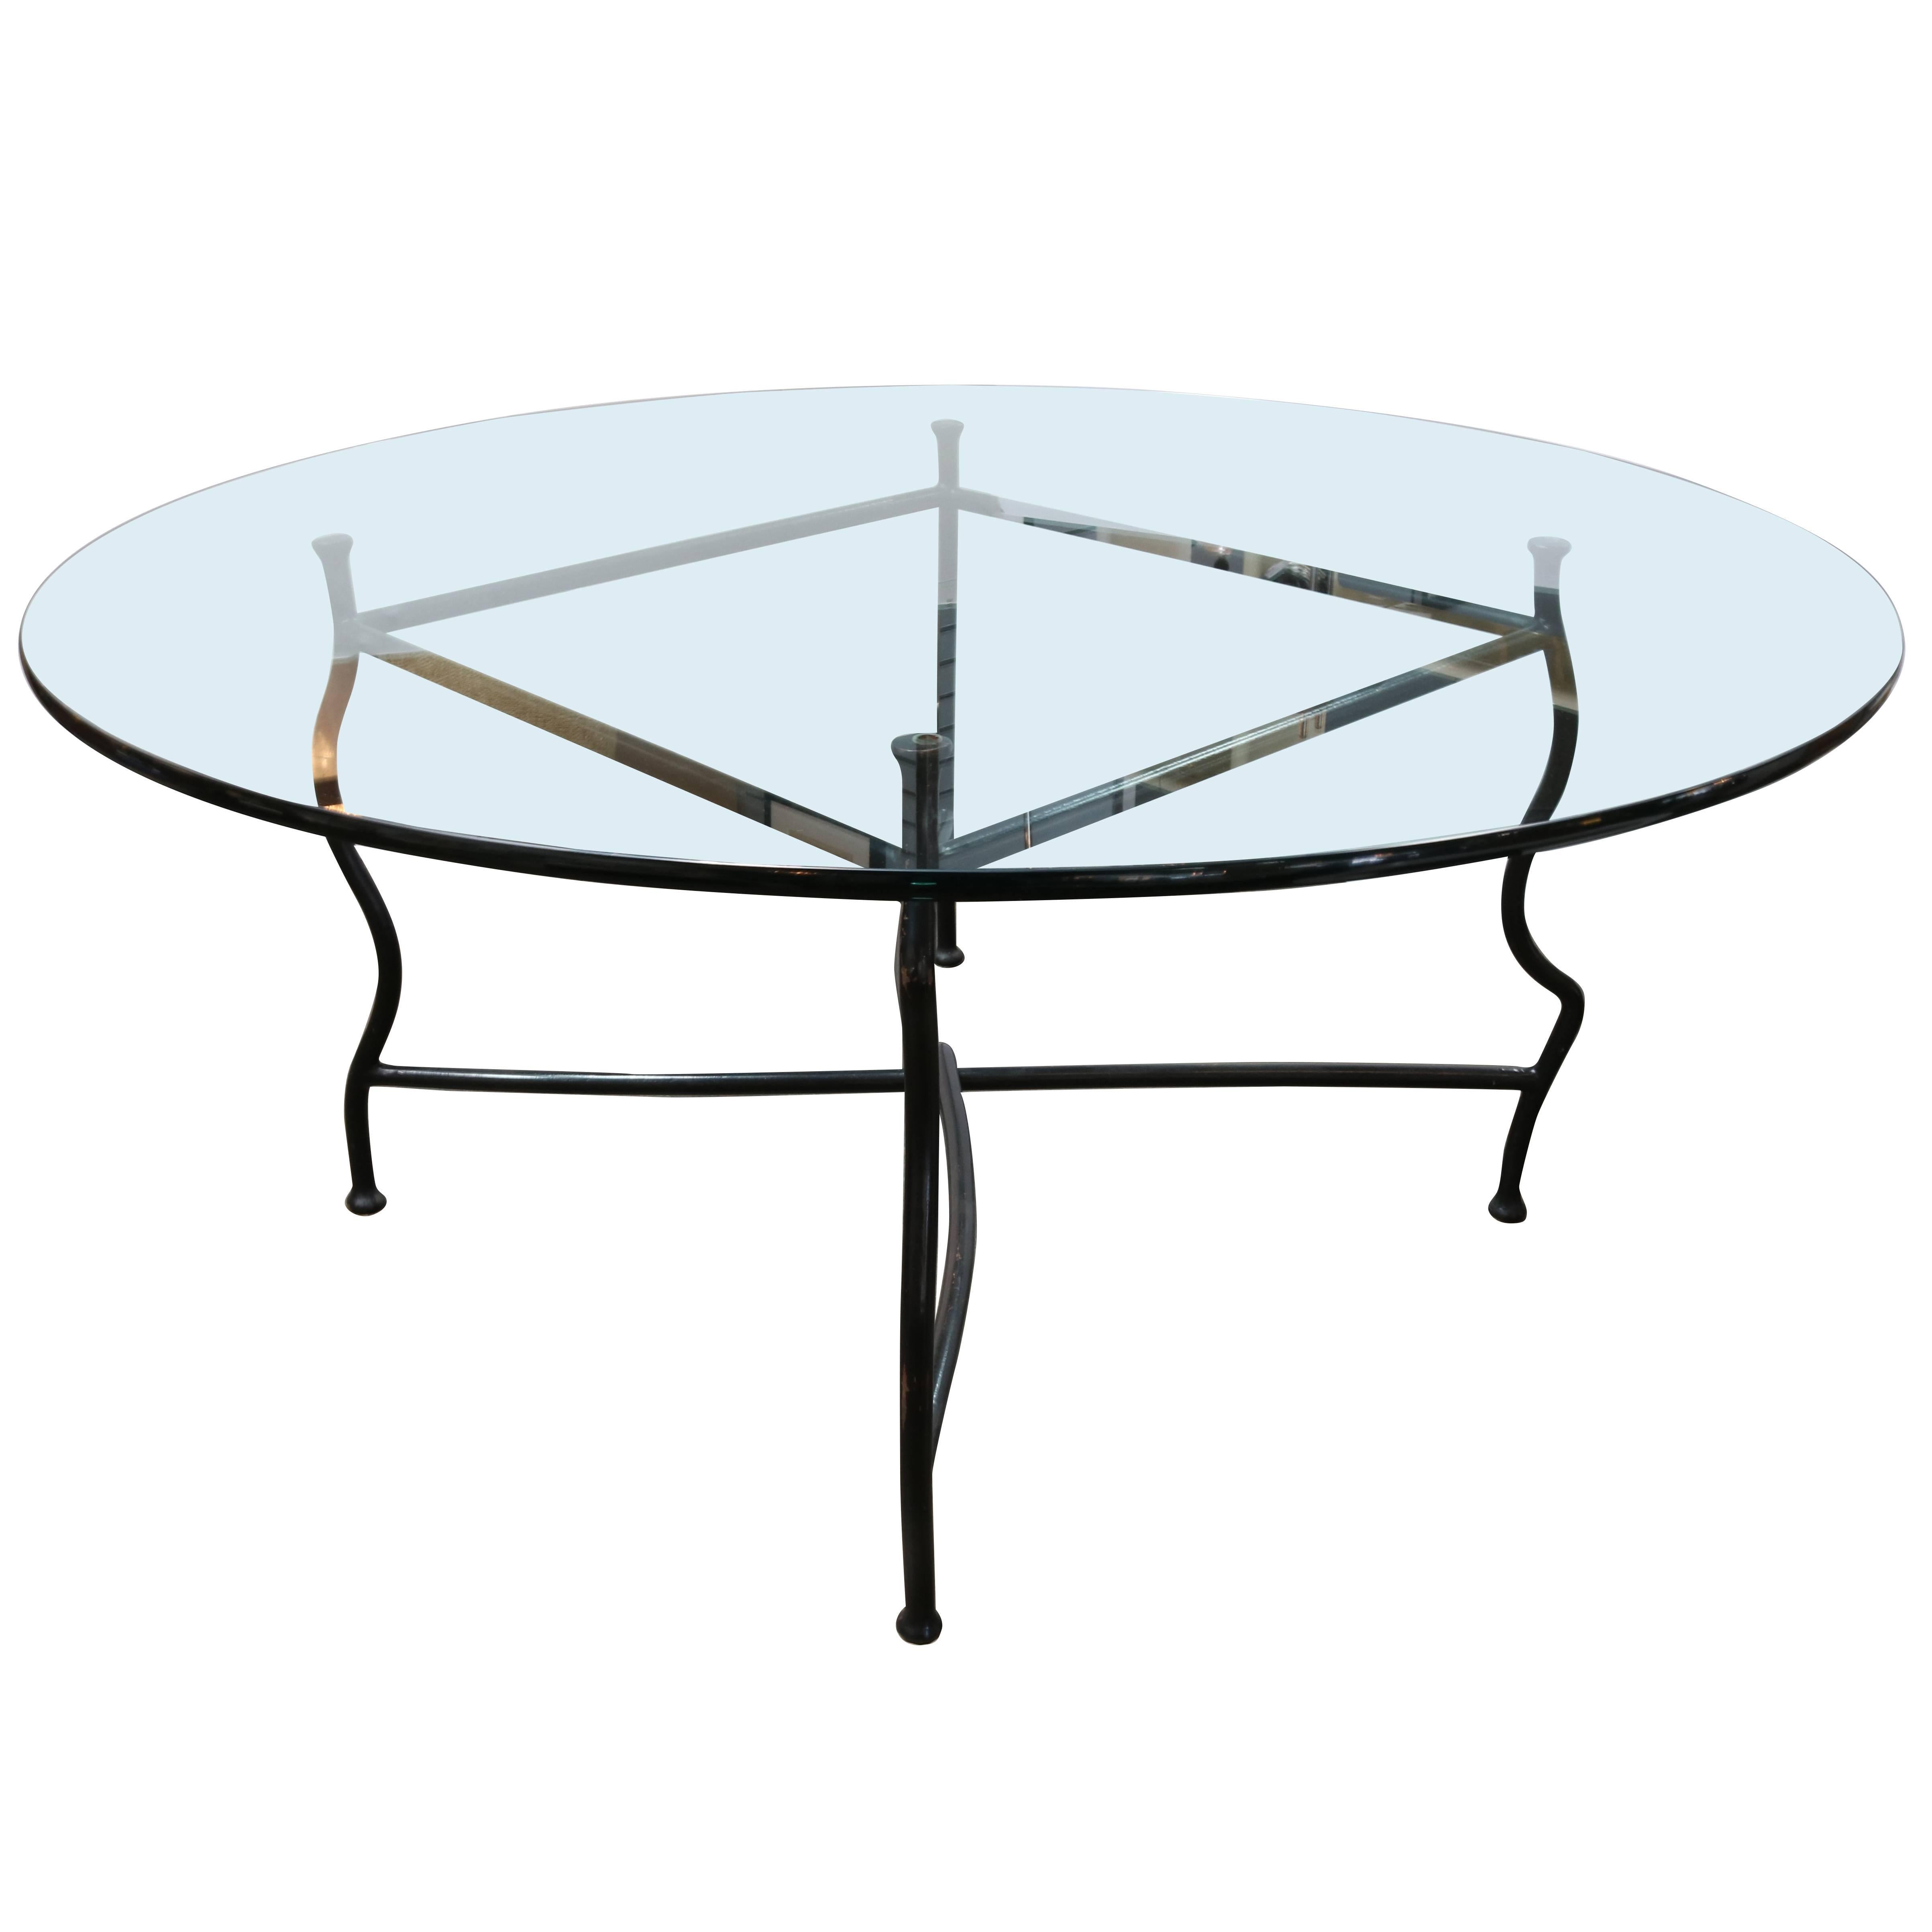 Unique Gun Finish Steel Base Dining Table with Glass Top